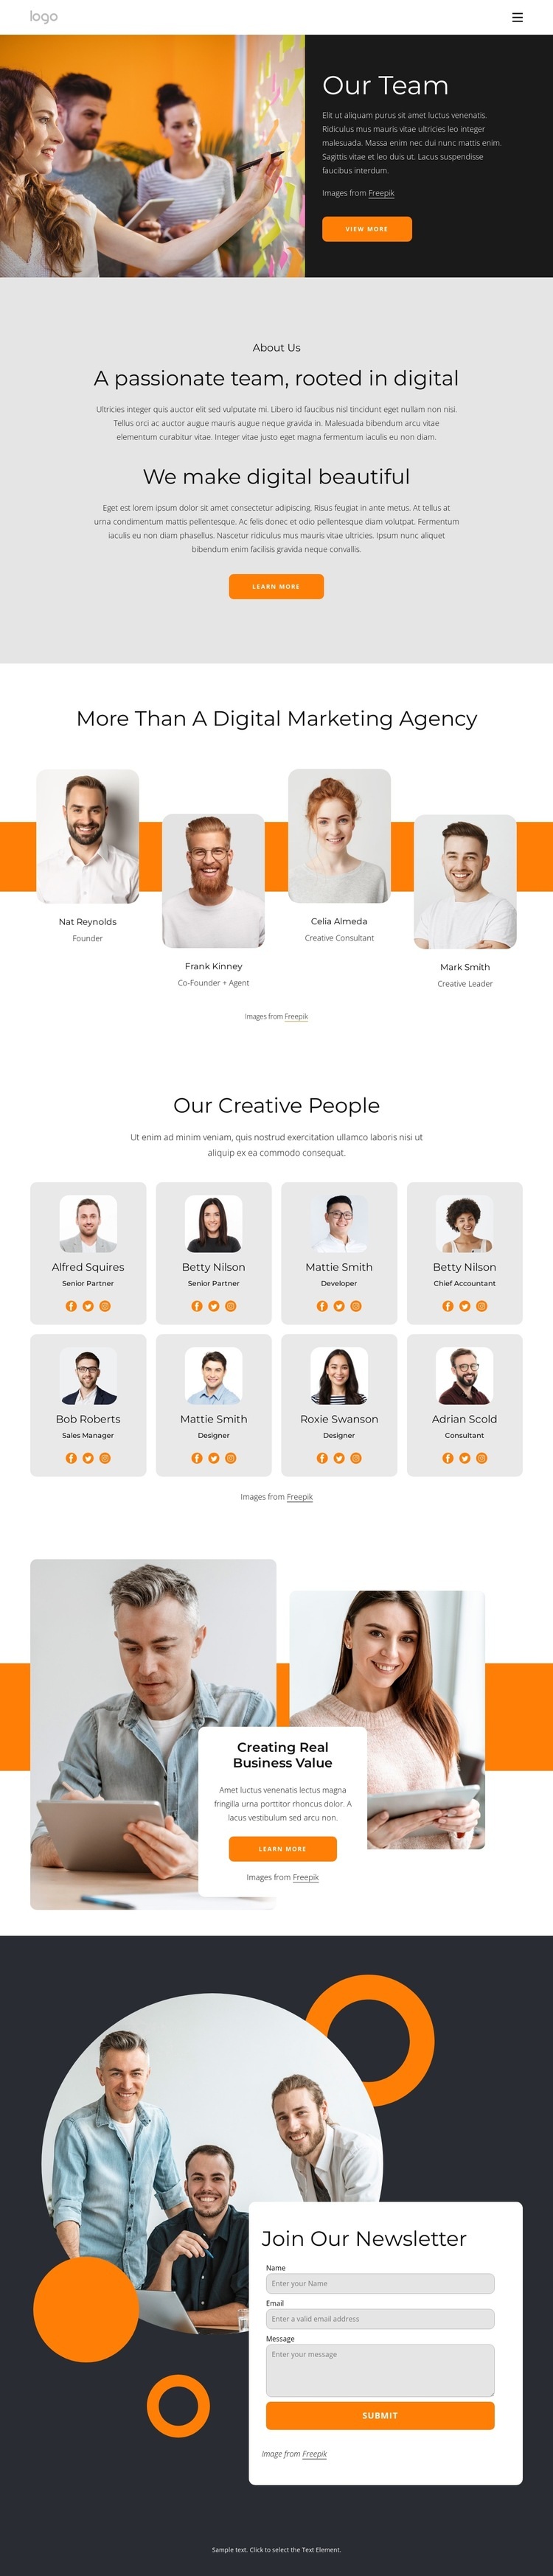 We are creative people with big dreams Webflow Template Alternative